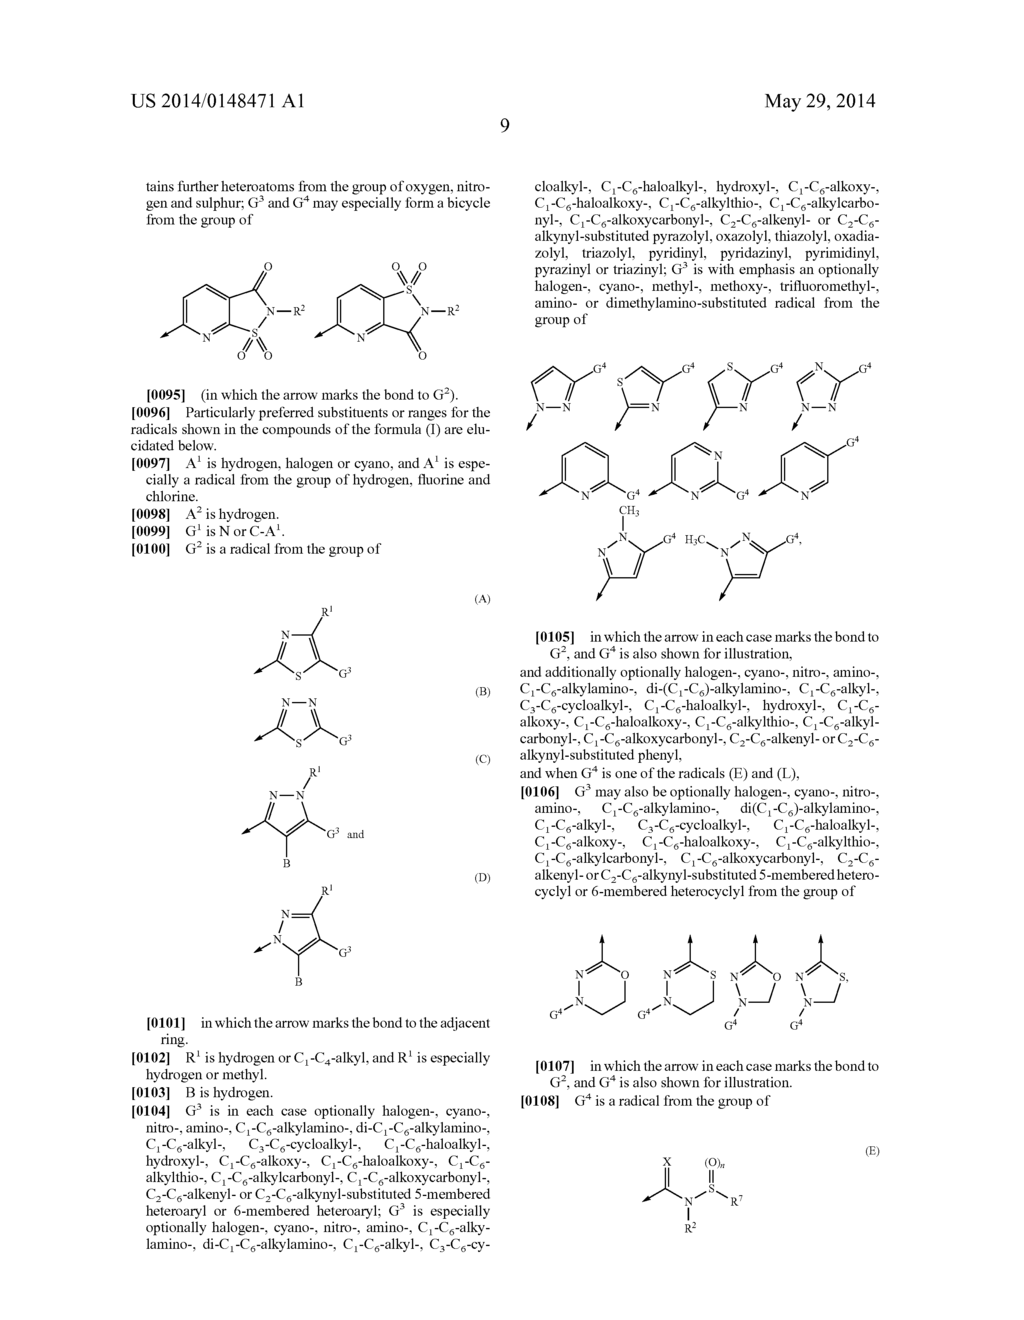 Heterocyclic Compounds as Pesticides - diagram, schematic, and image 10